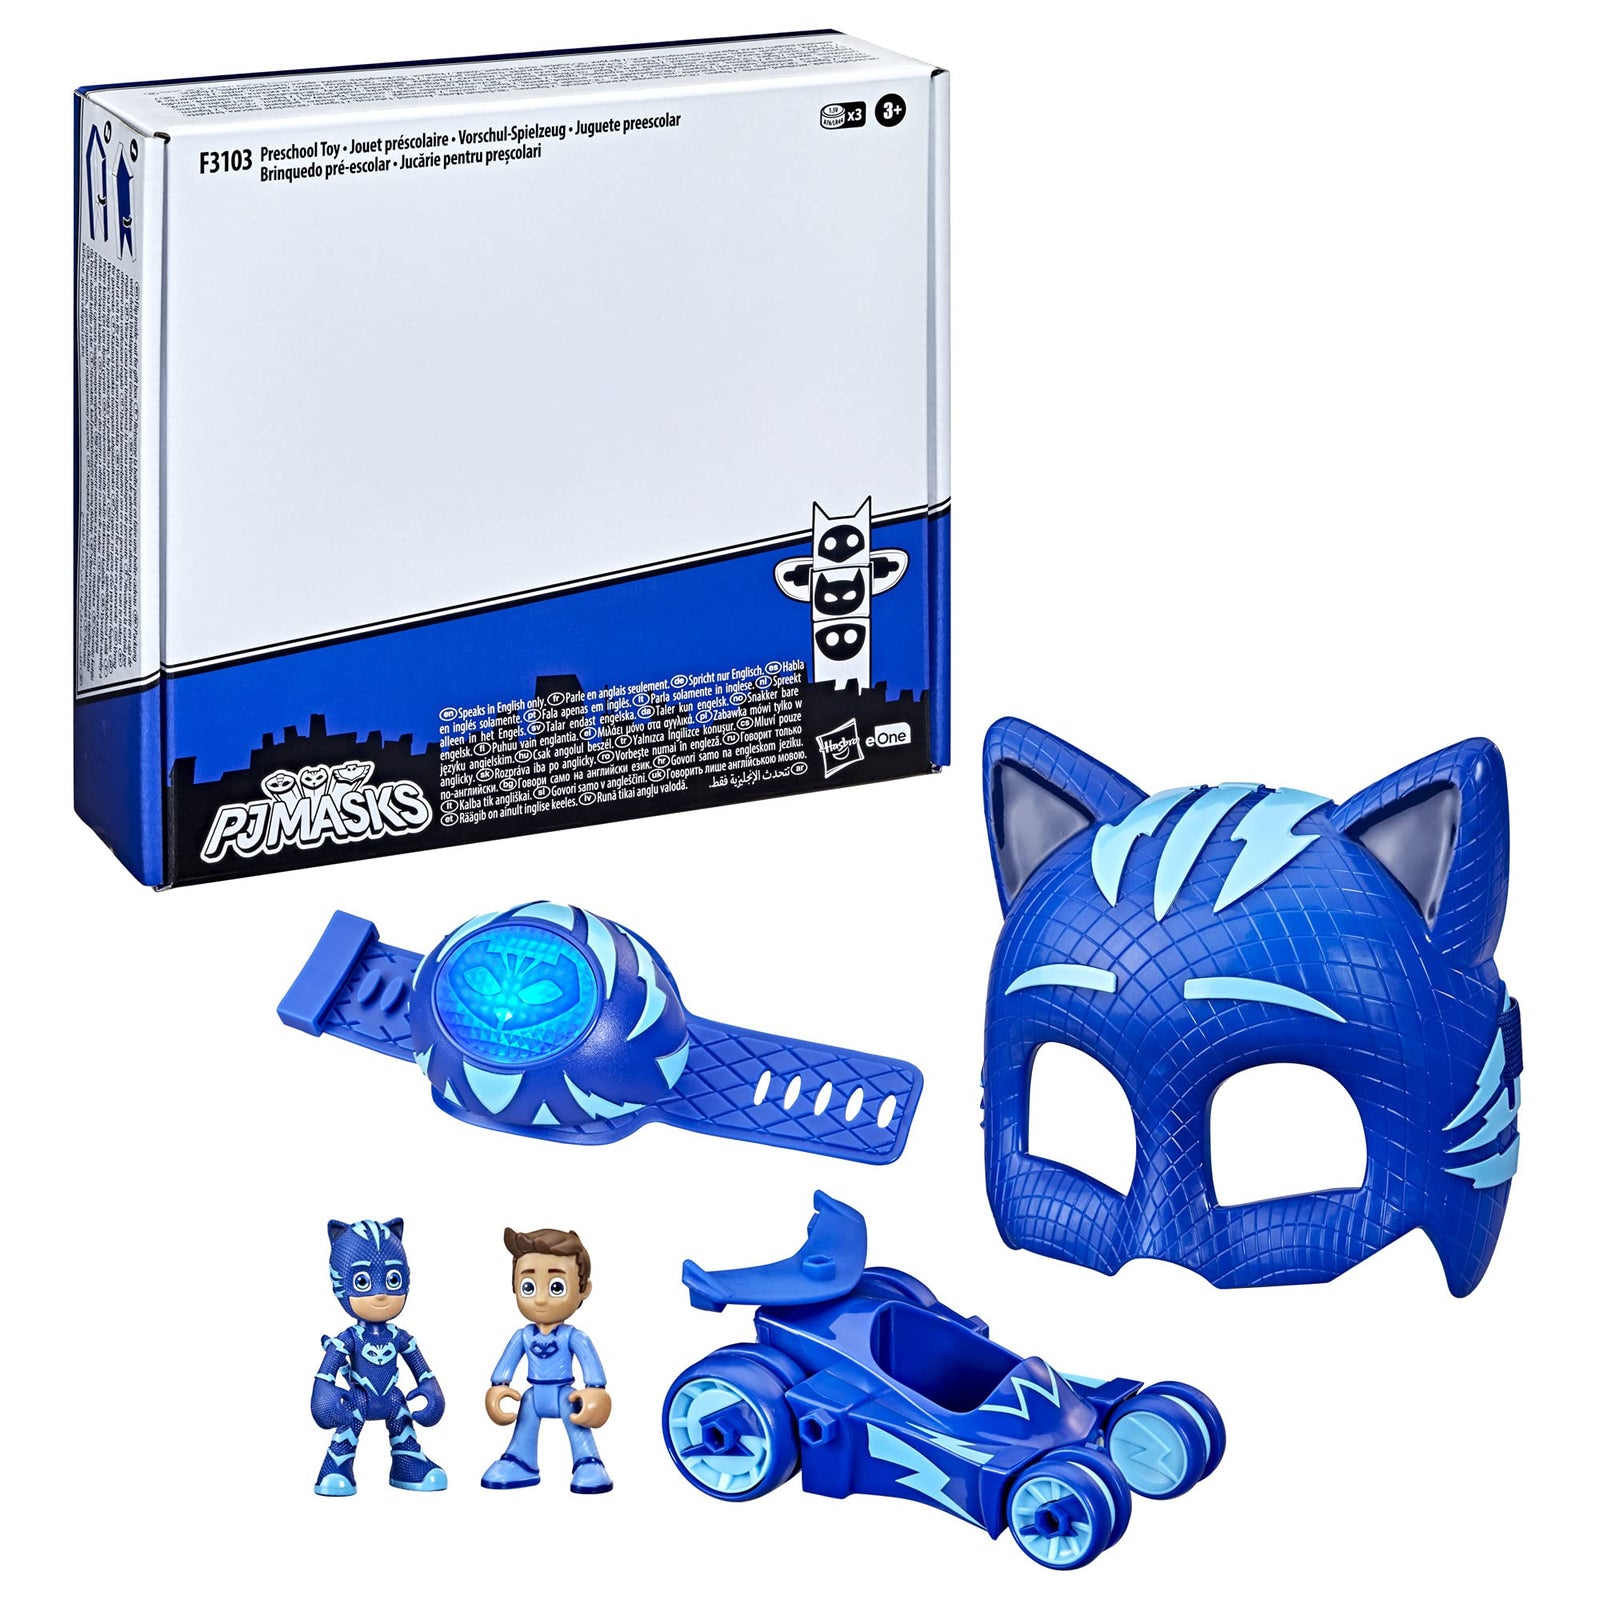 PJ-Masks Catboy Power Pack Preschool Toy Set with 2 PJ-Masks-Action-Figures, Vehicle, Wristband, and-Costume-Mask for Kids Ages 3 and Up